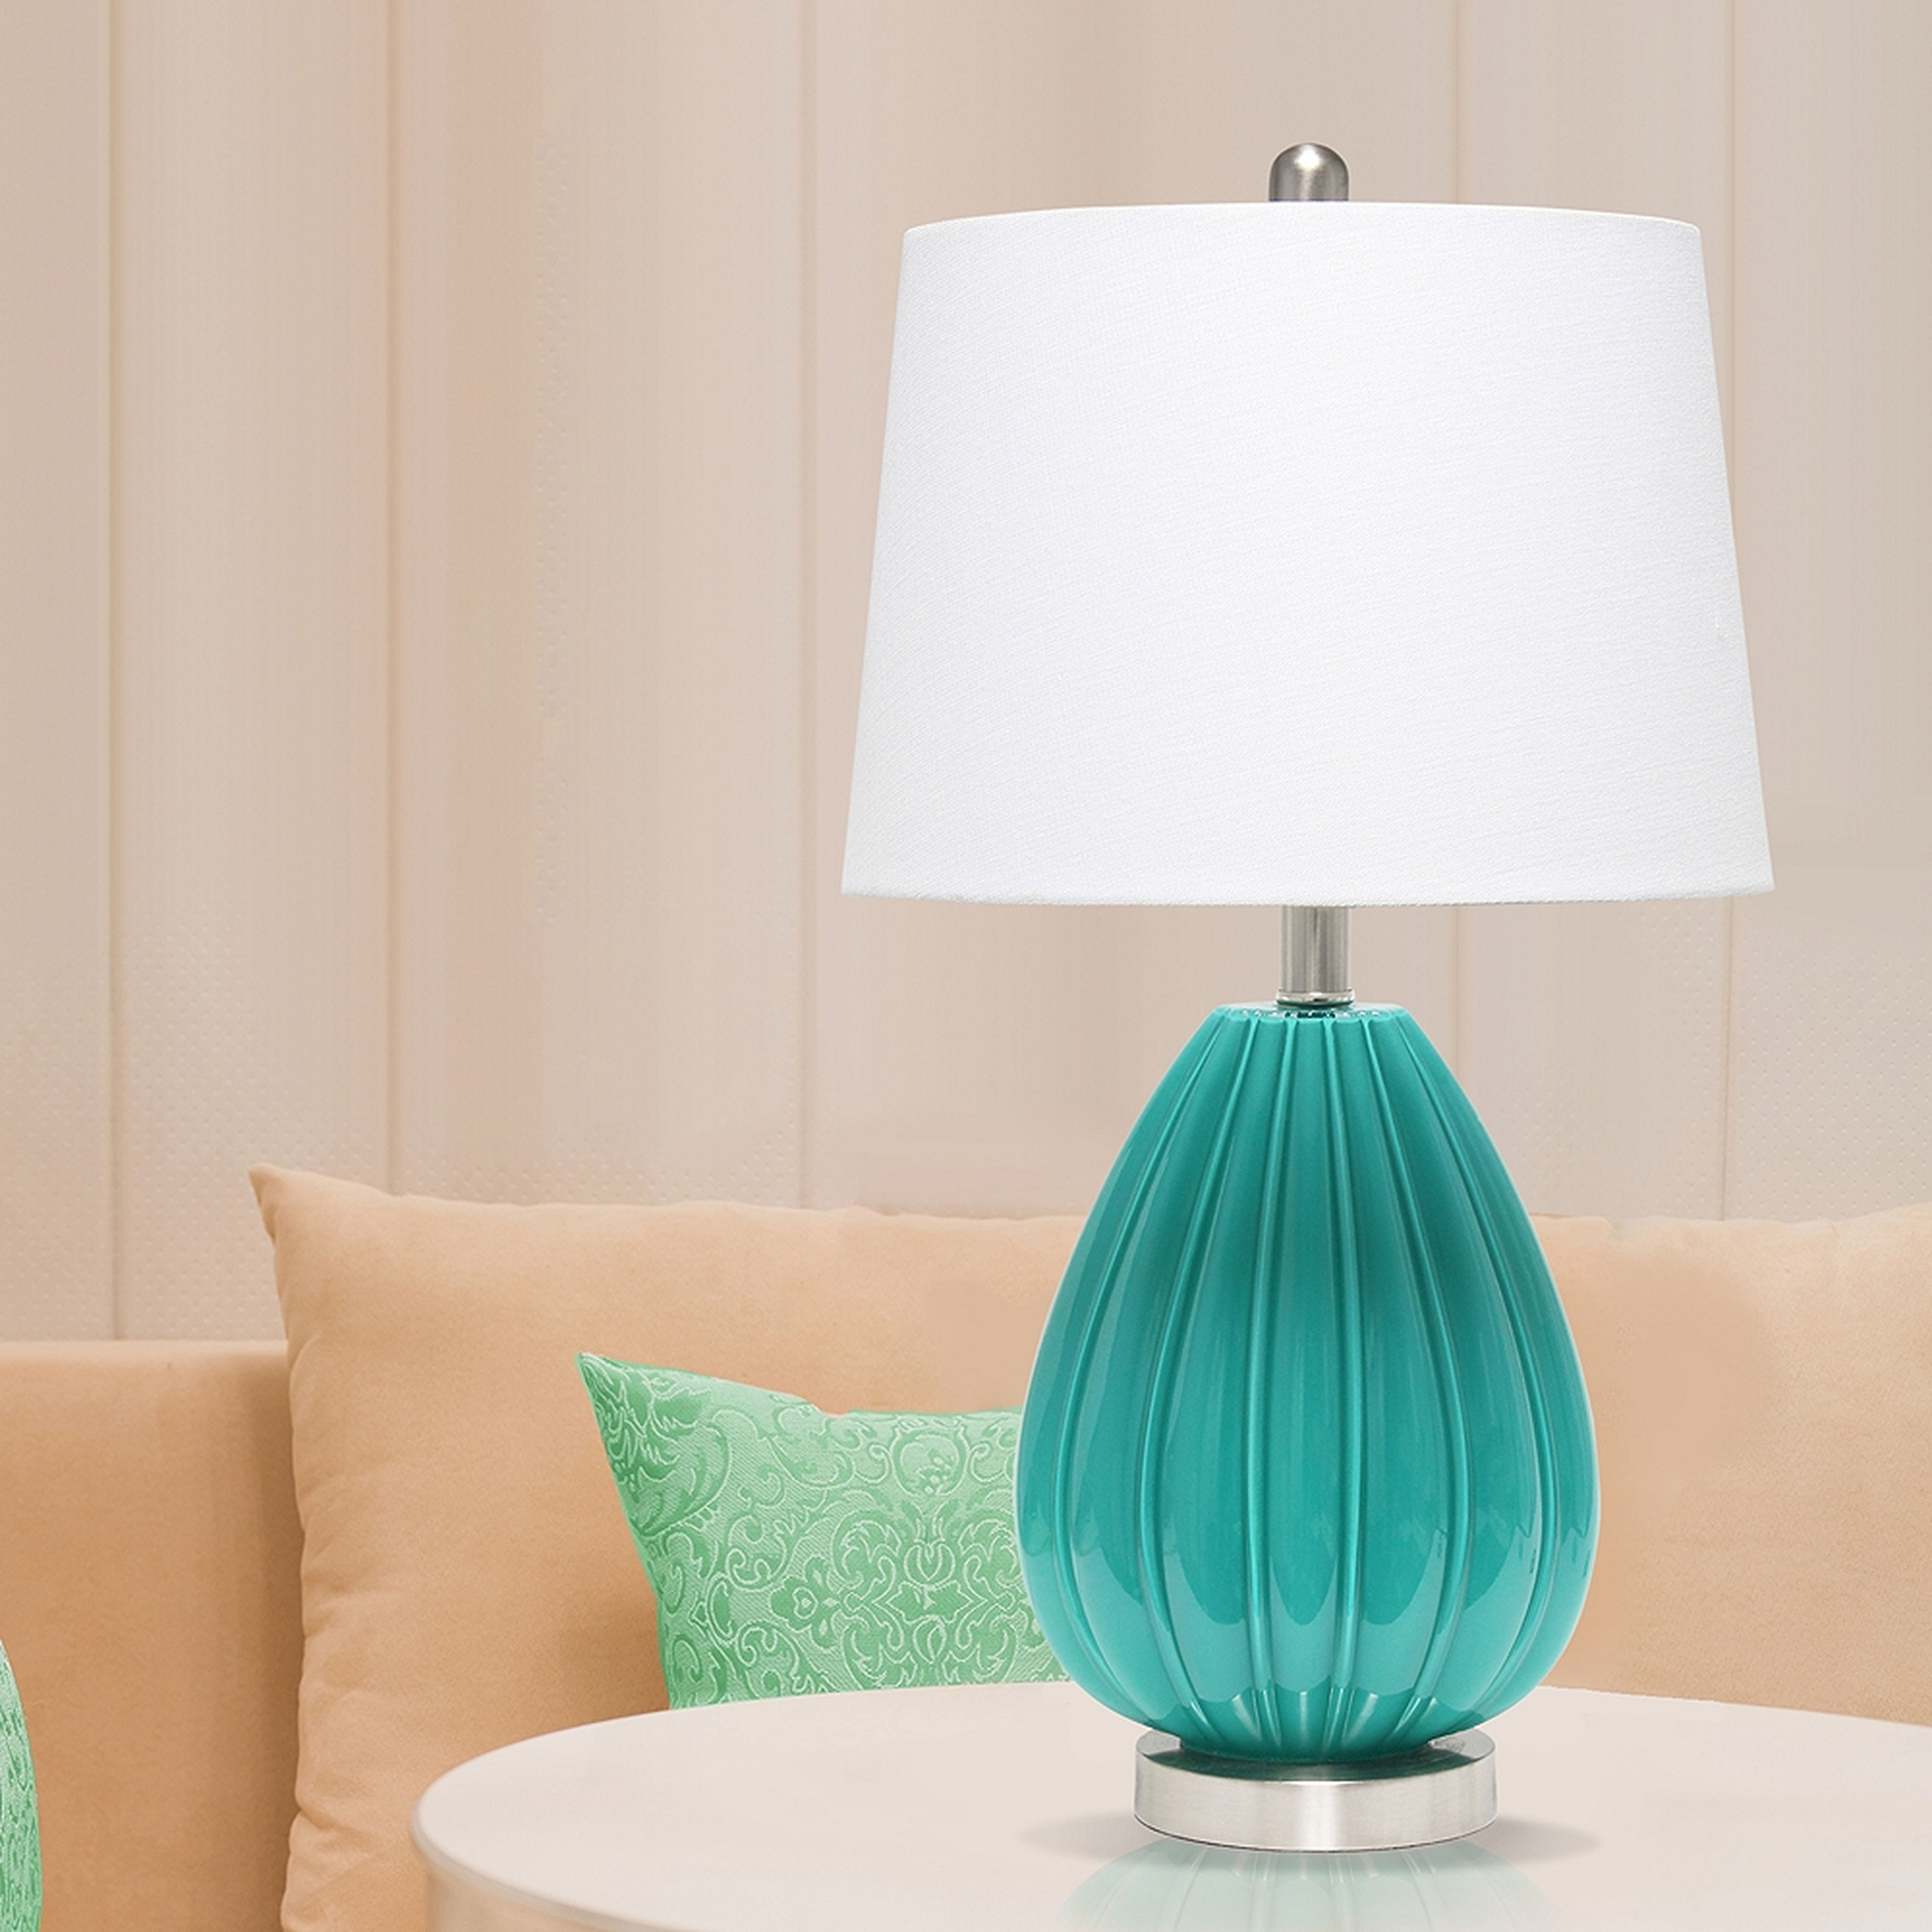 Lalia Home Teal Pleated Glass Accent Table Lamp - Style # 85R57 - Lamps Plus